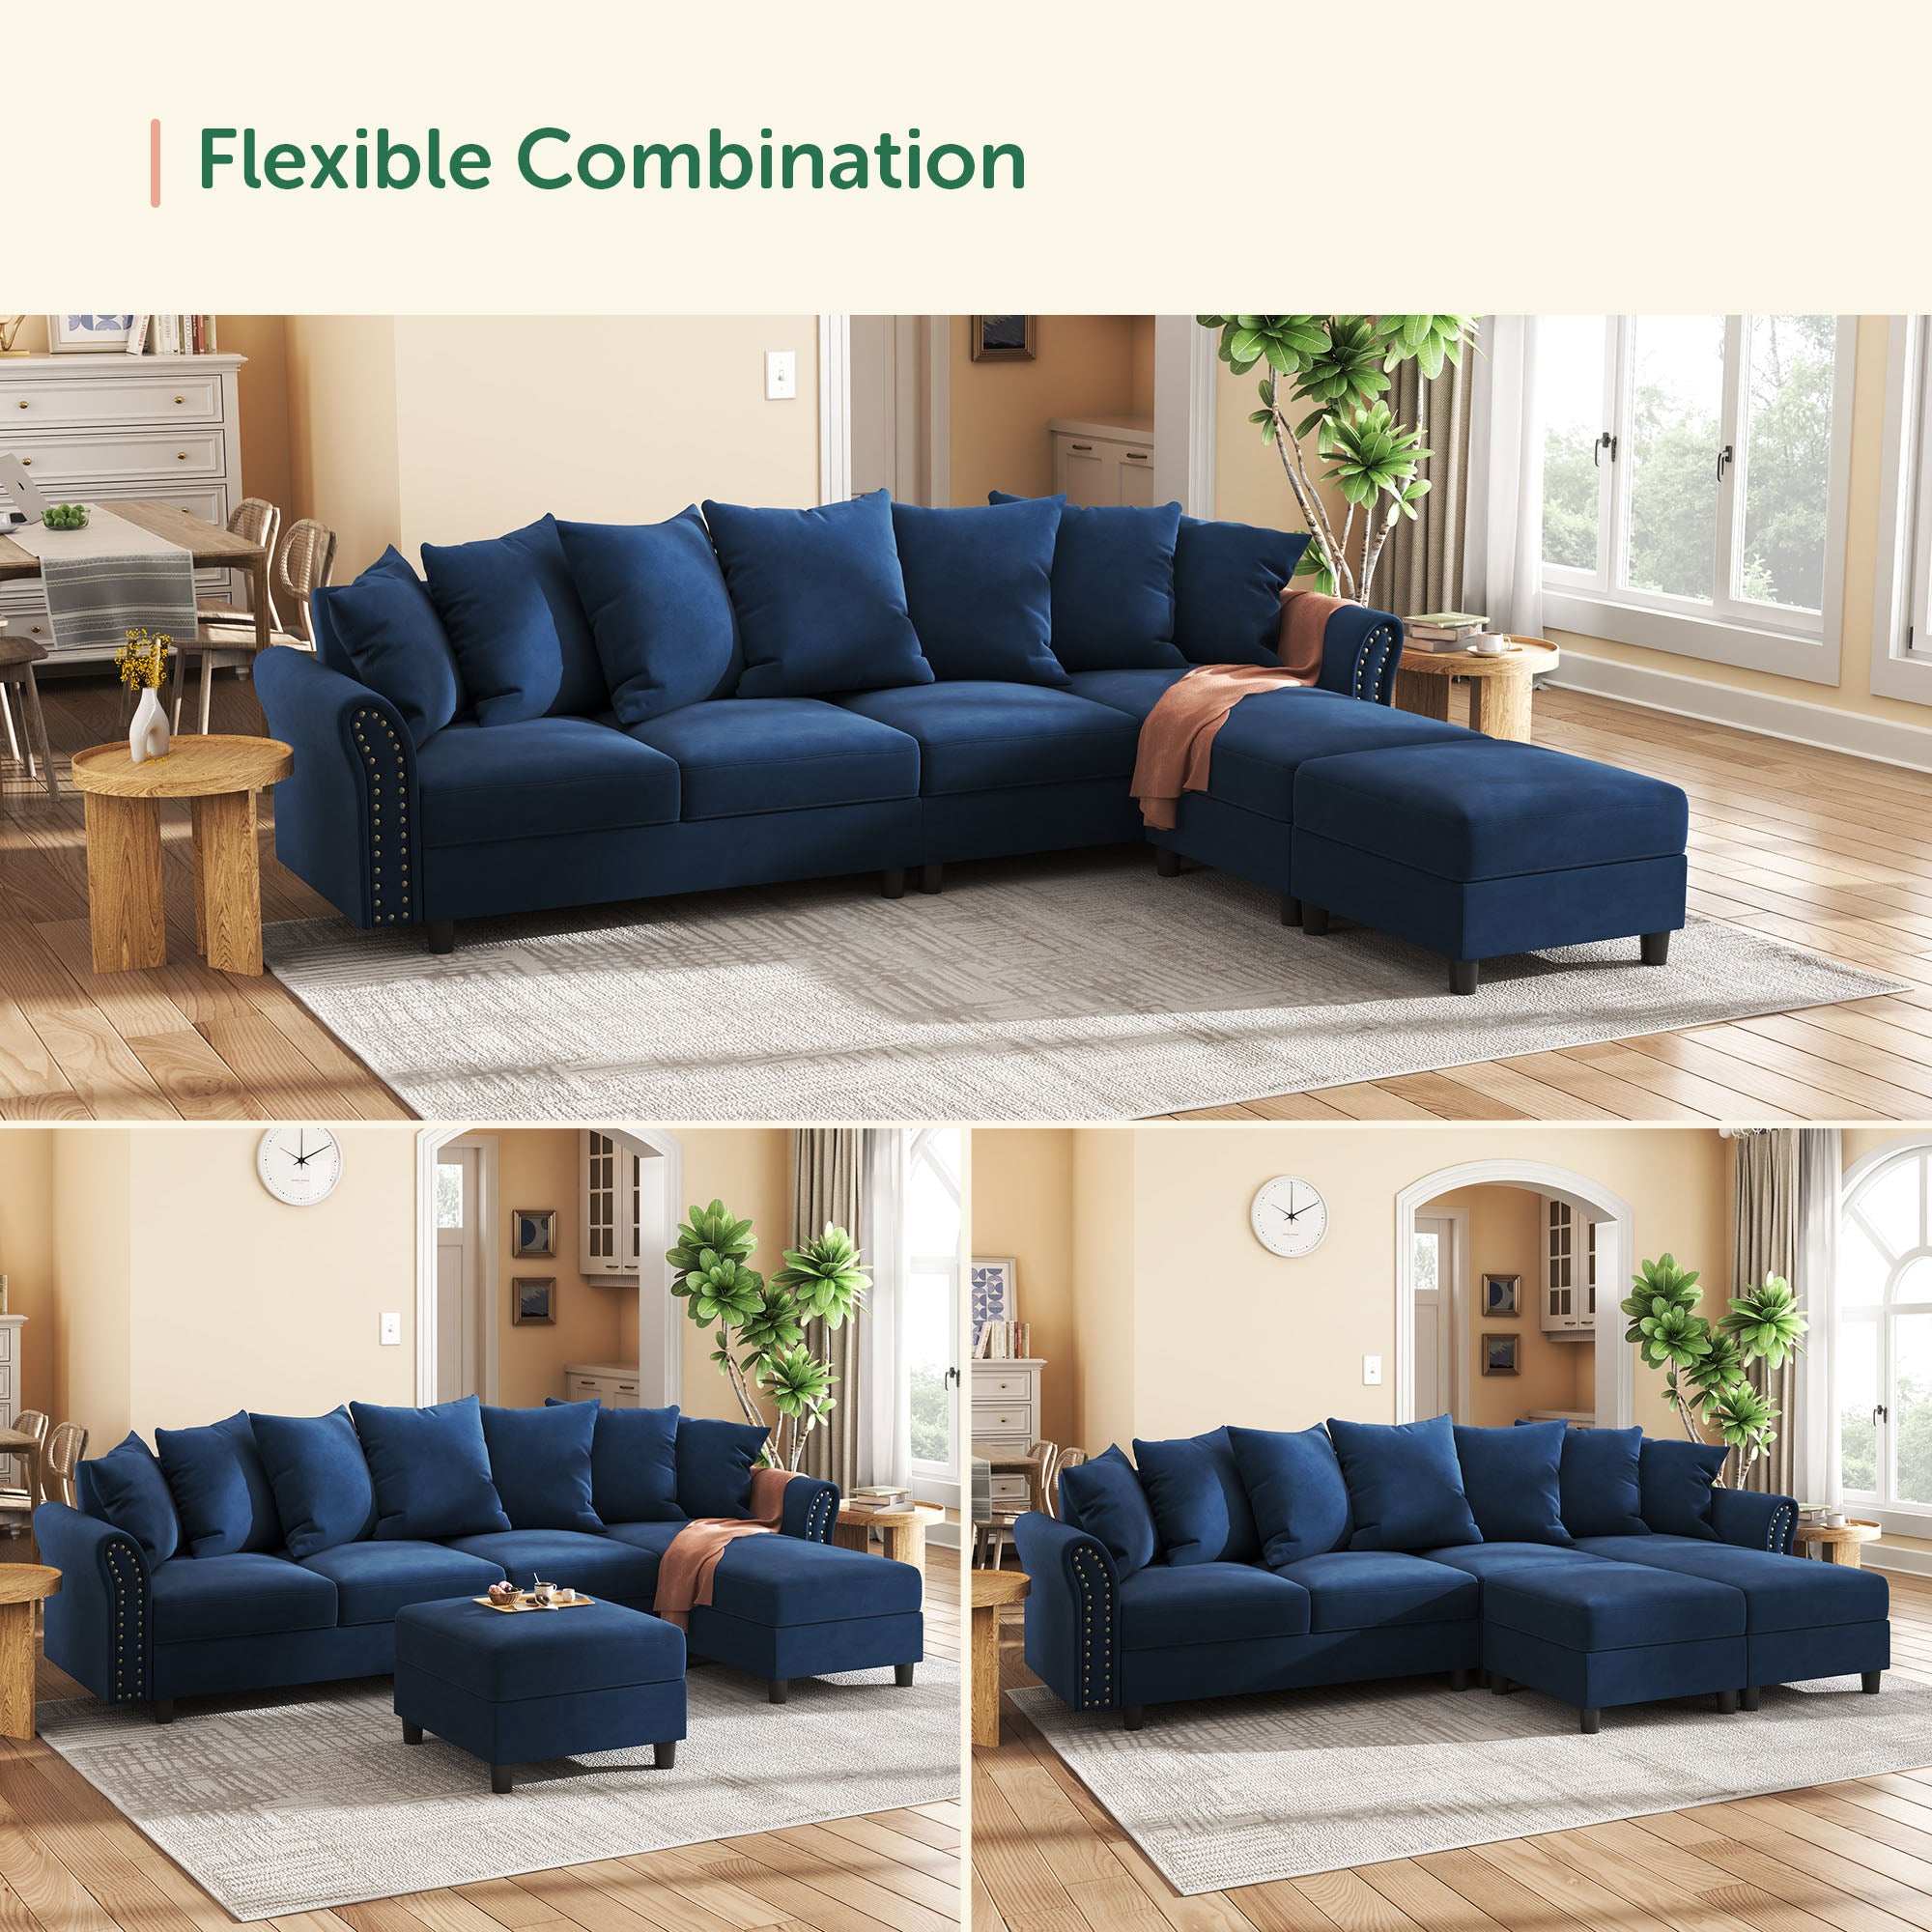 HONBAY Velvet 4-Seat Sofa U-Shaped Cushion Pillows Sectional Couch